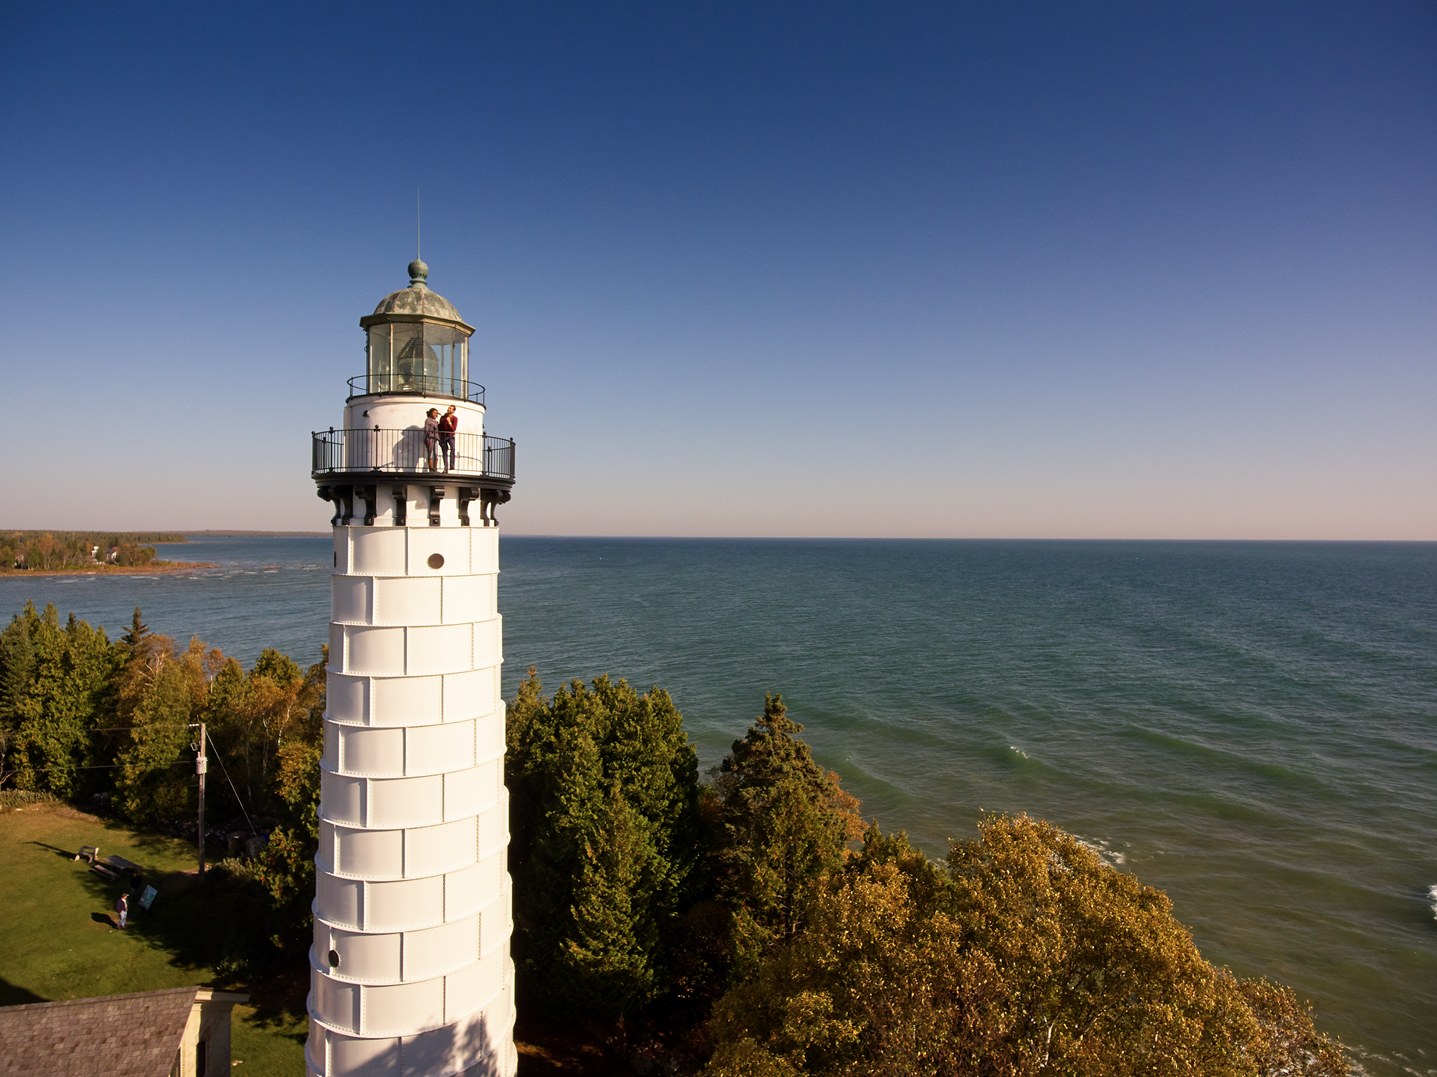 People stand on a balcony atop Cana Island lighthouse taking in the lake views.